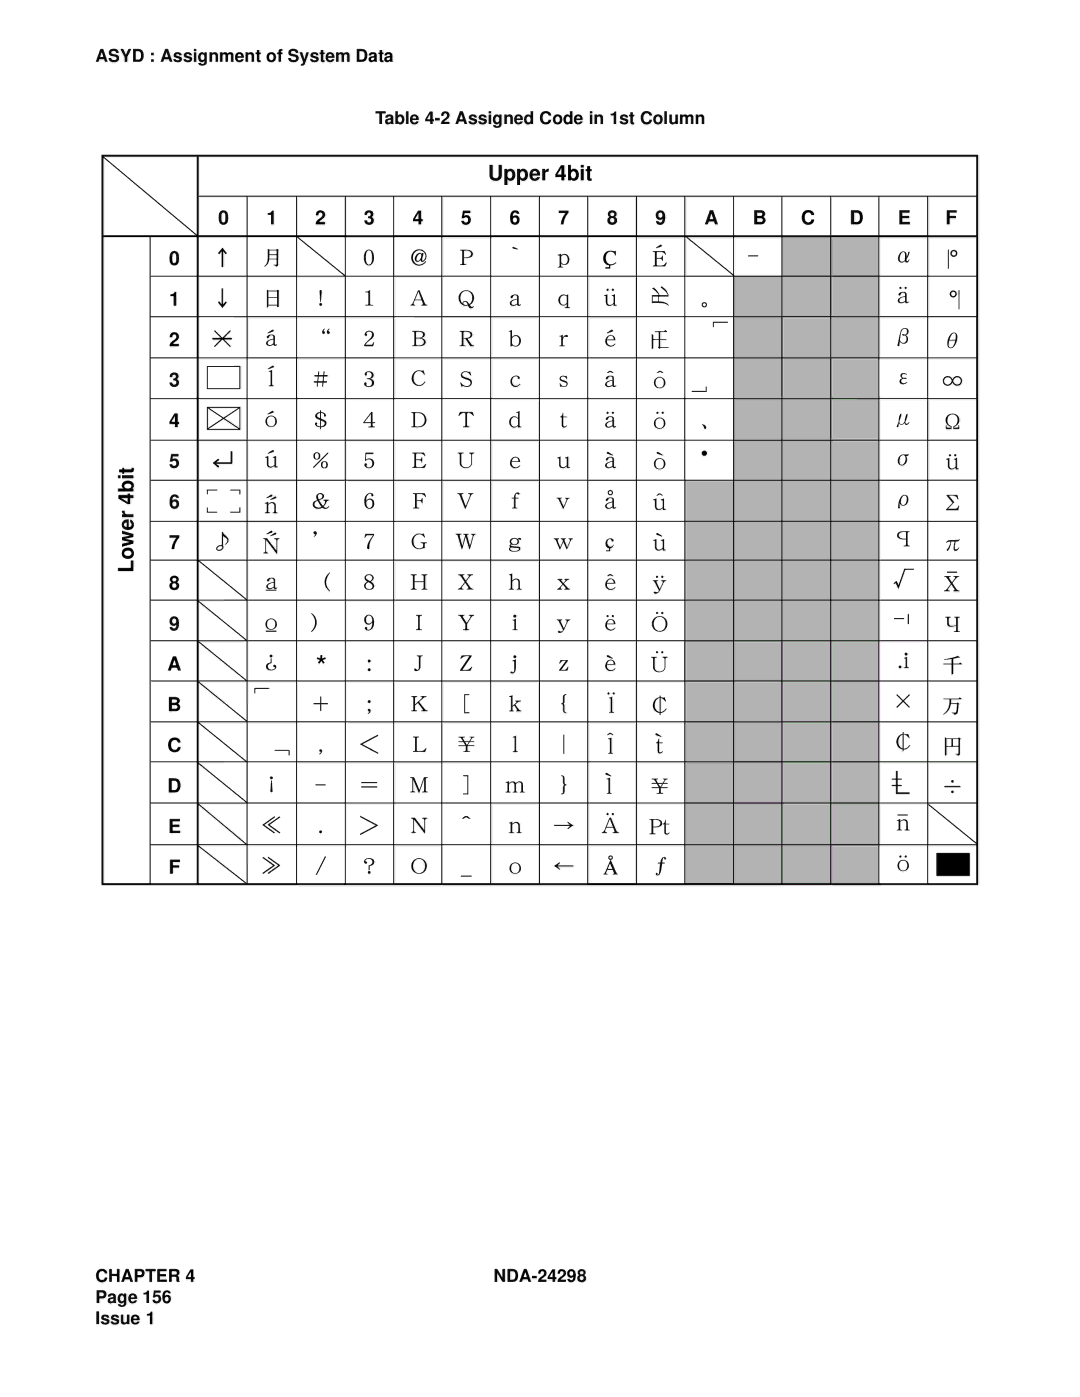 NEC NDA-24298 manual 4bit Lower, Asyd Assignment of System Data Assigned Code in 1st Column 